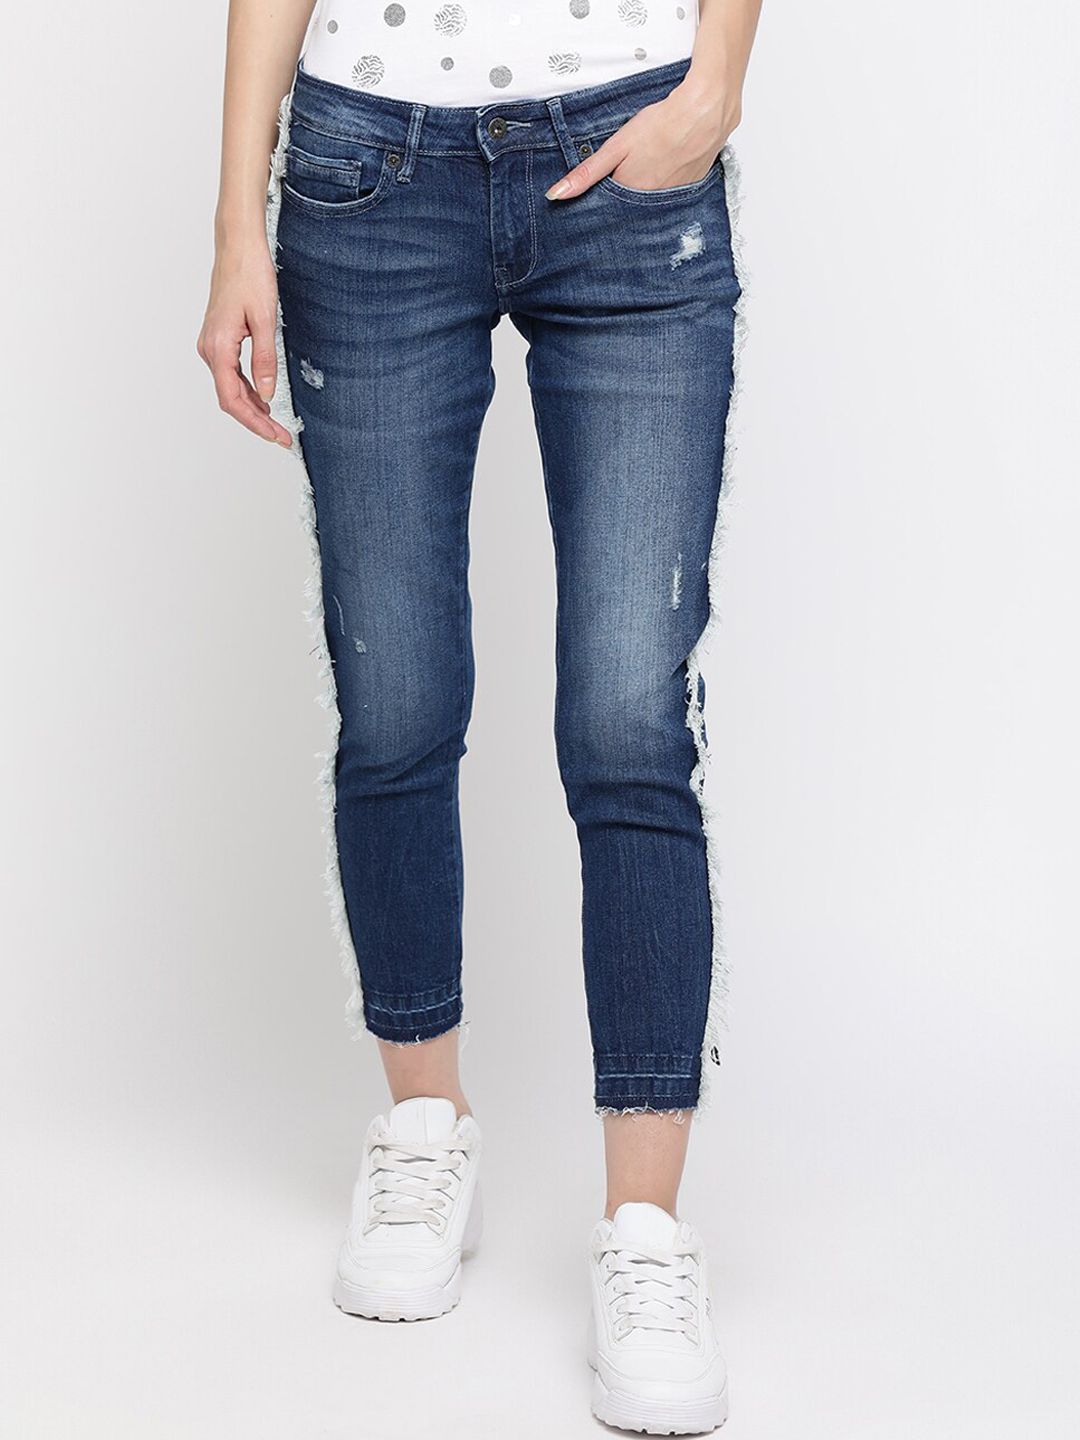 Pepe Jeans Women Navy Blue Skinny Fit Jeans Price in India